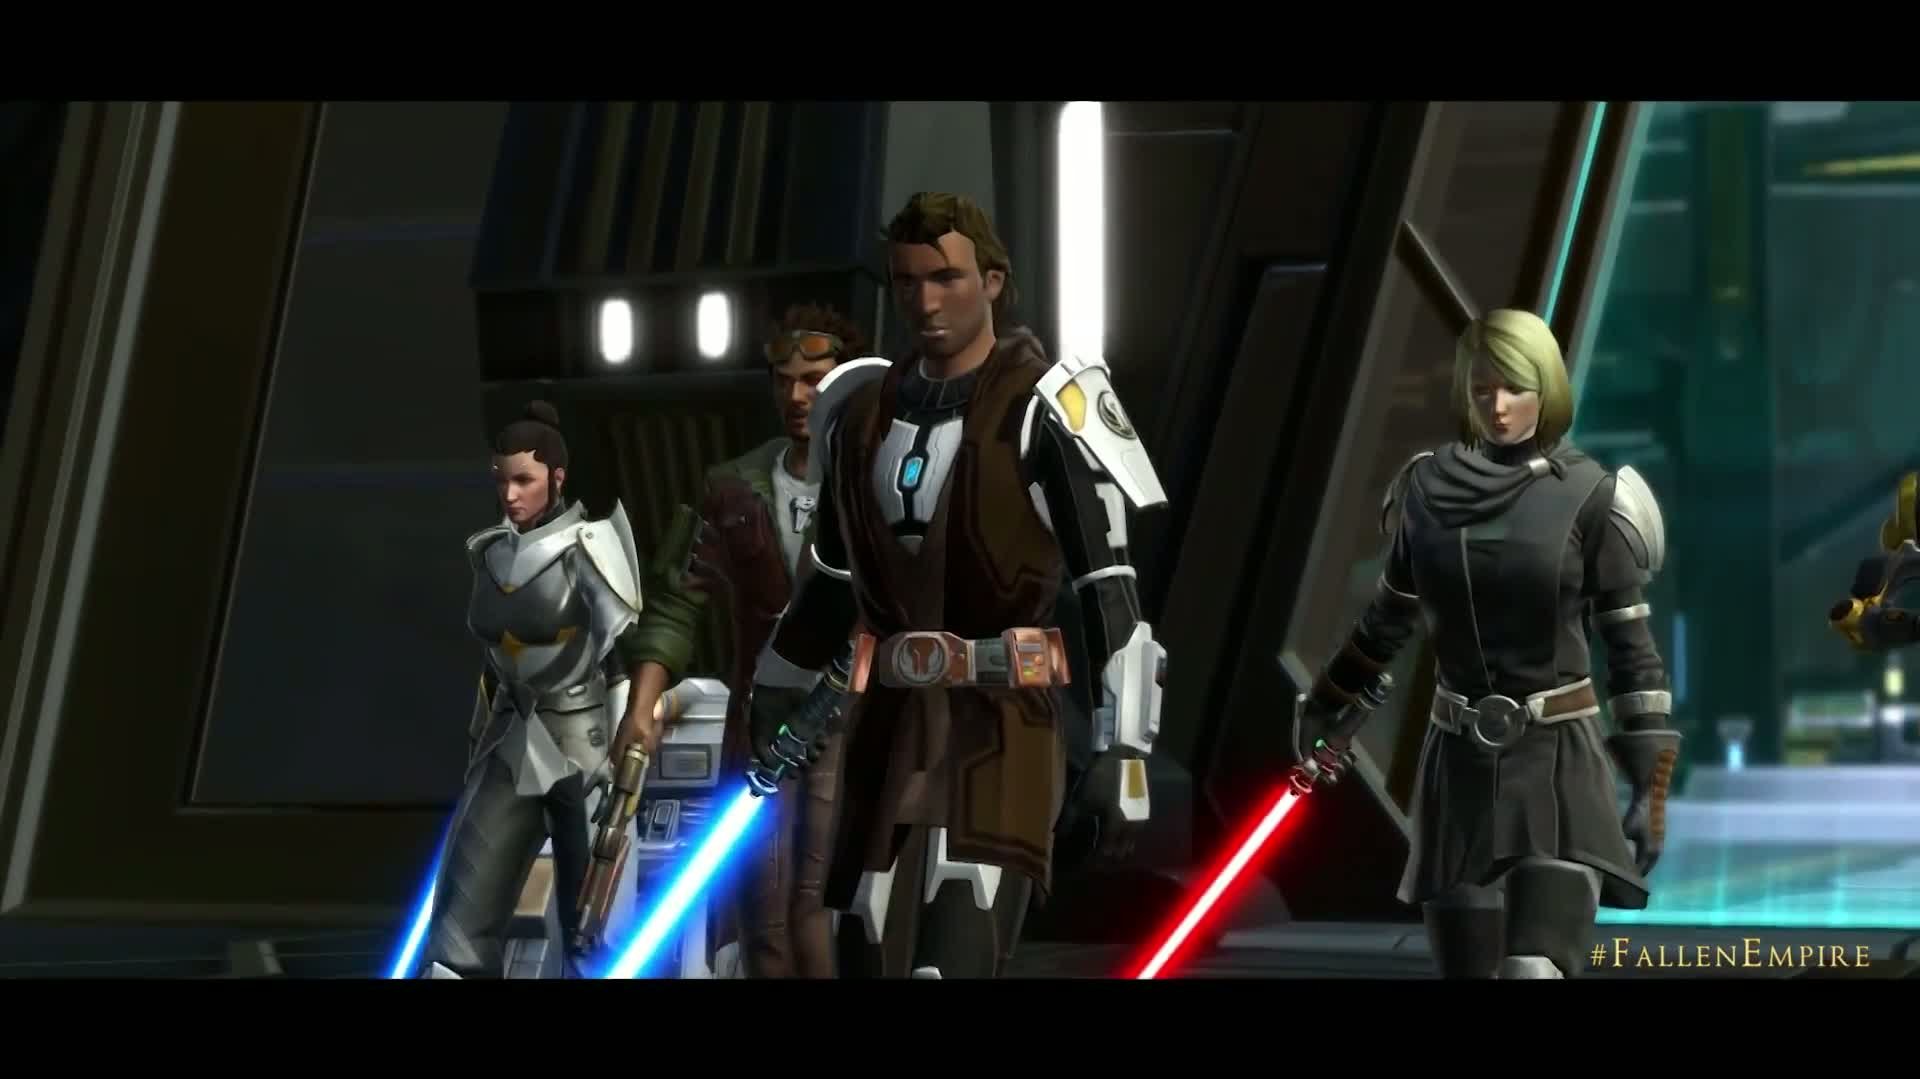 knights of the old republic ii gameplay